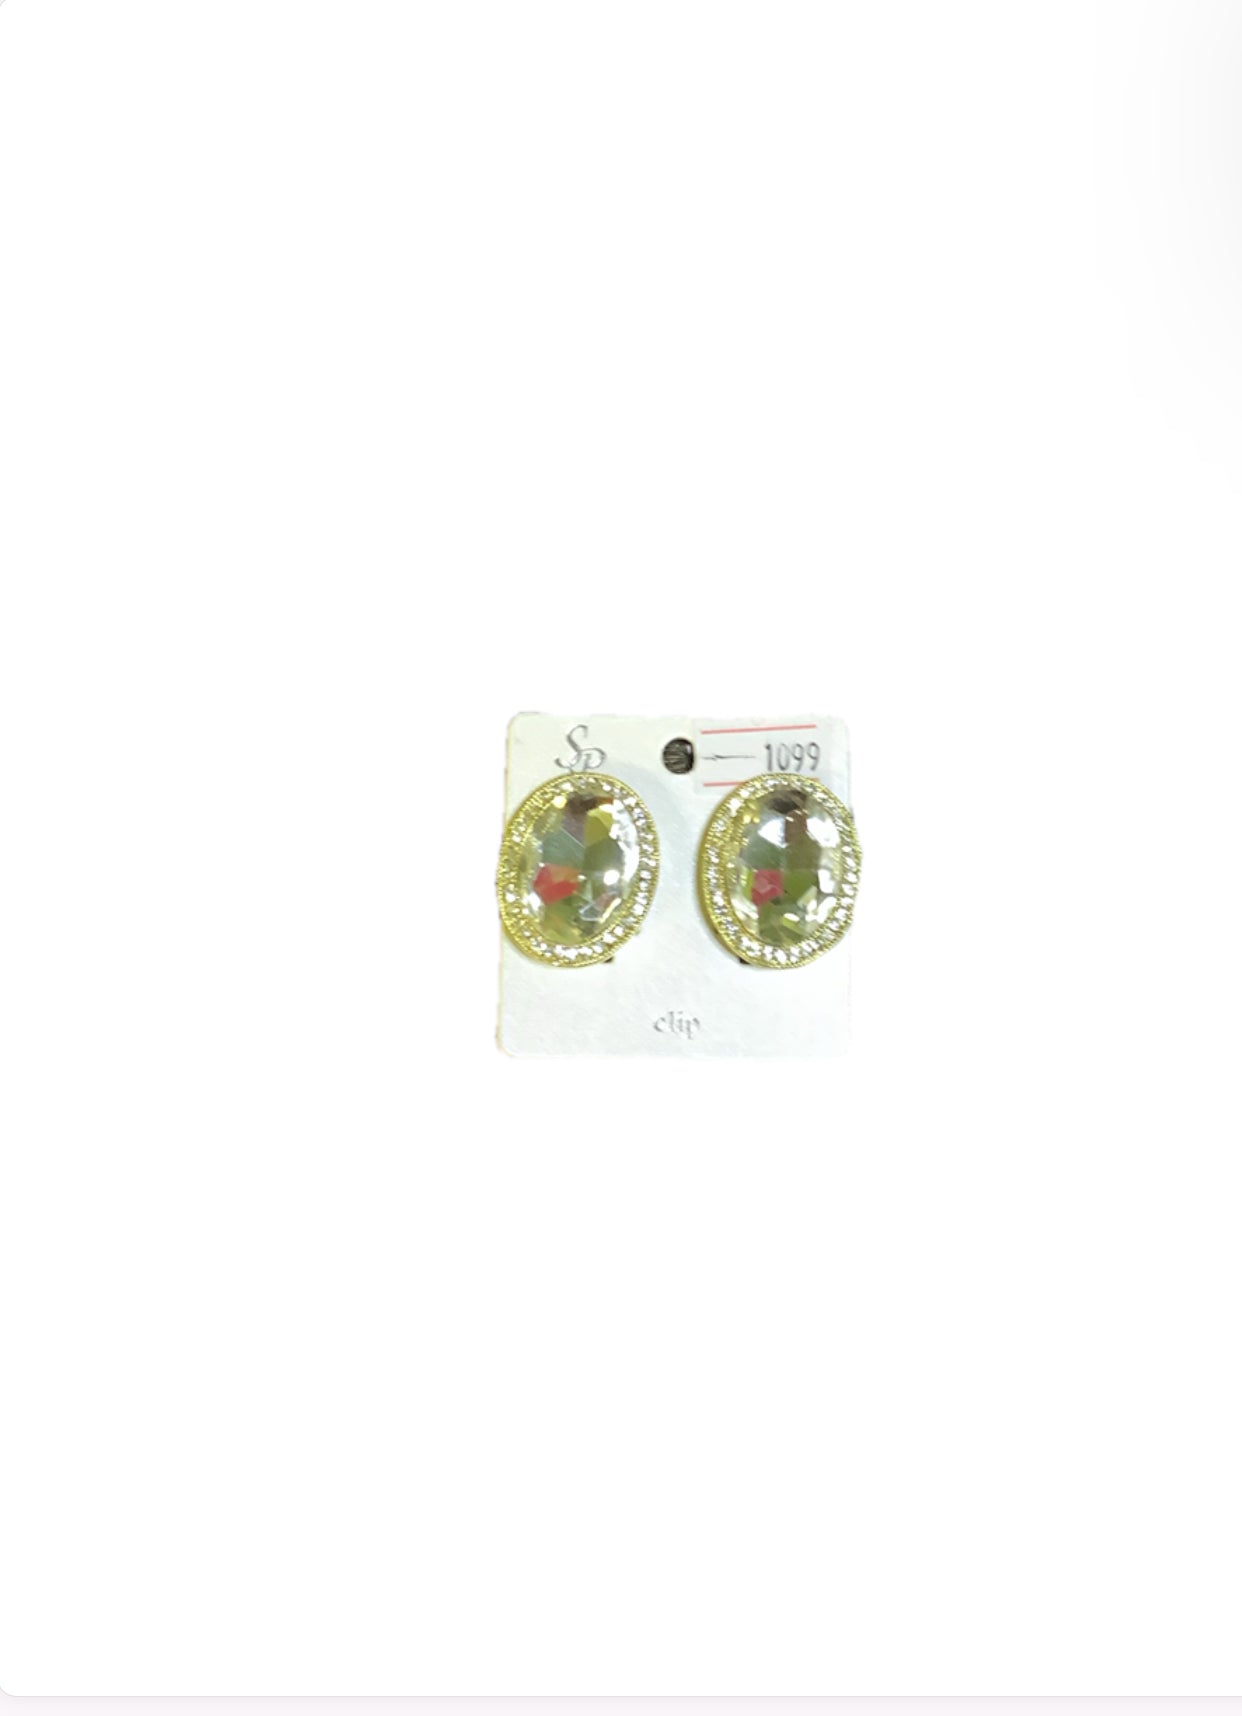 SP Clipped Round Silver Earrings